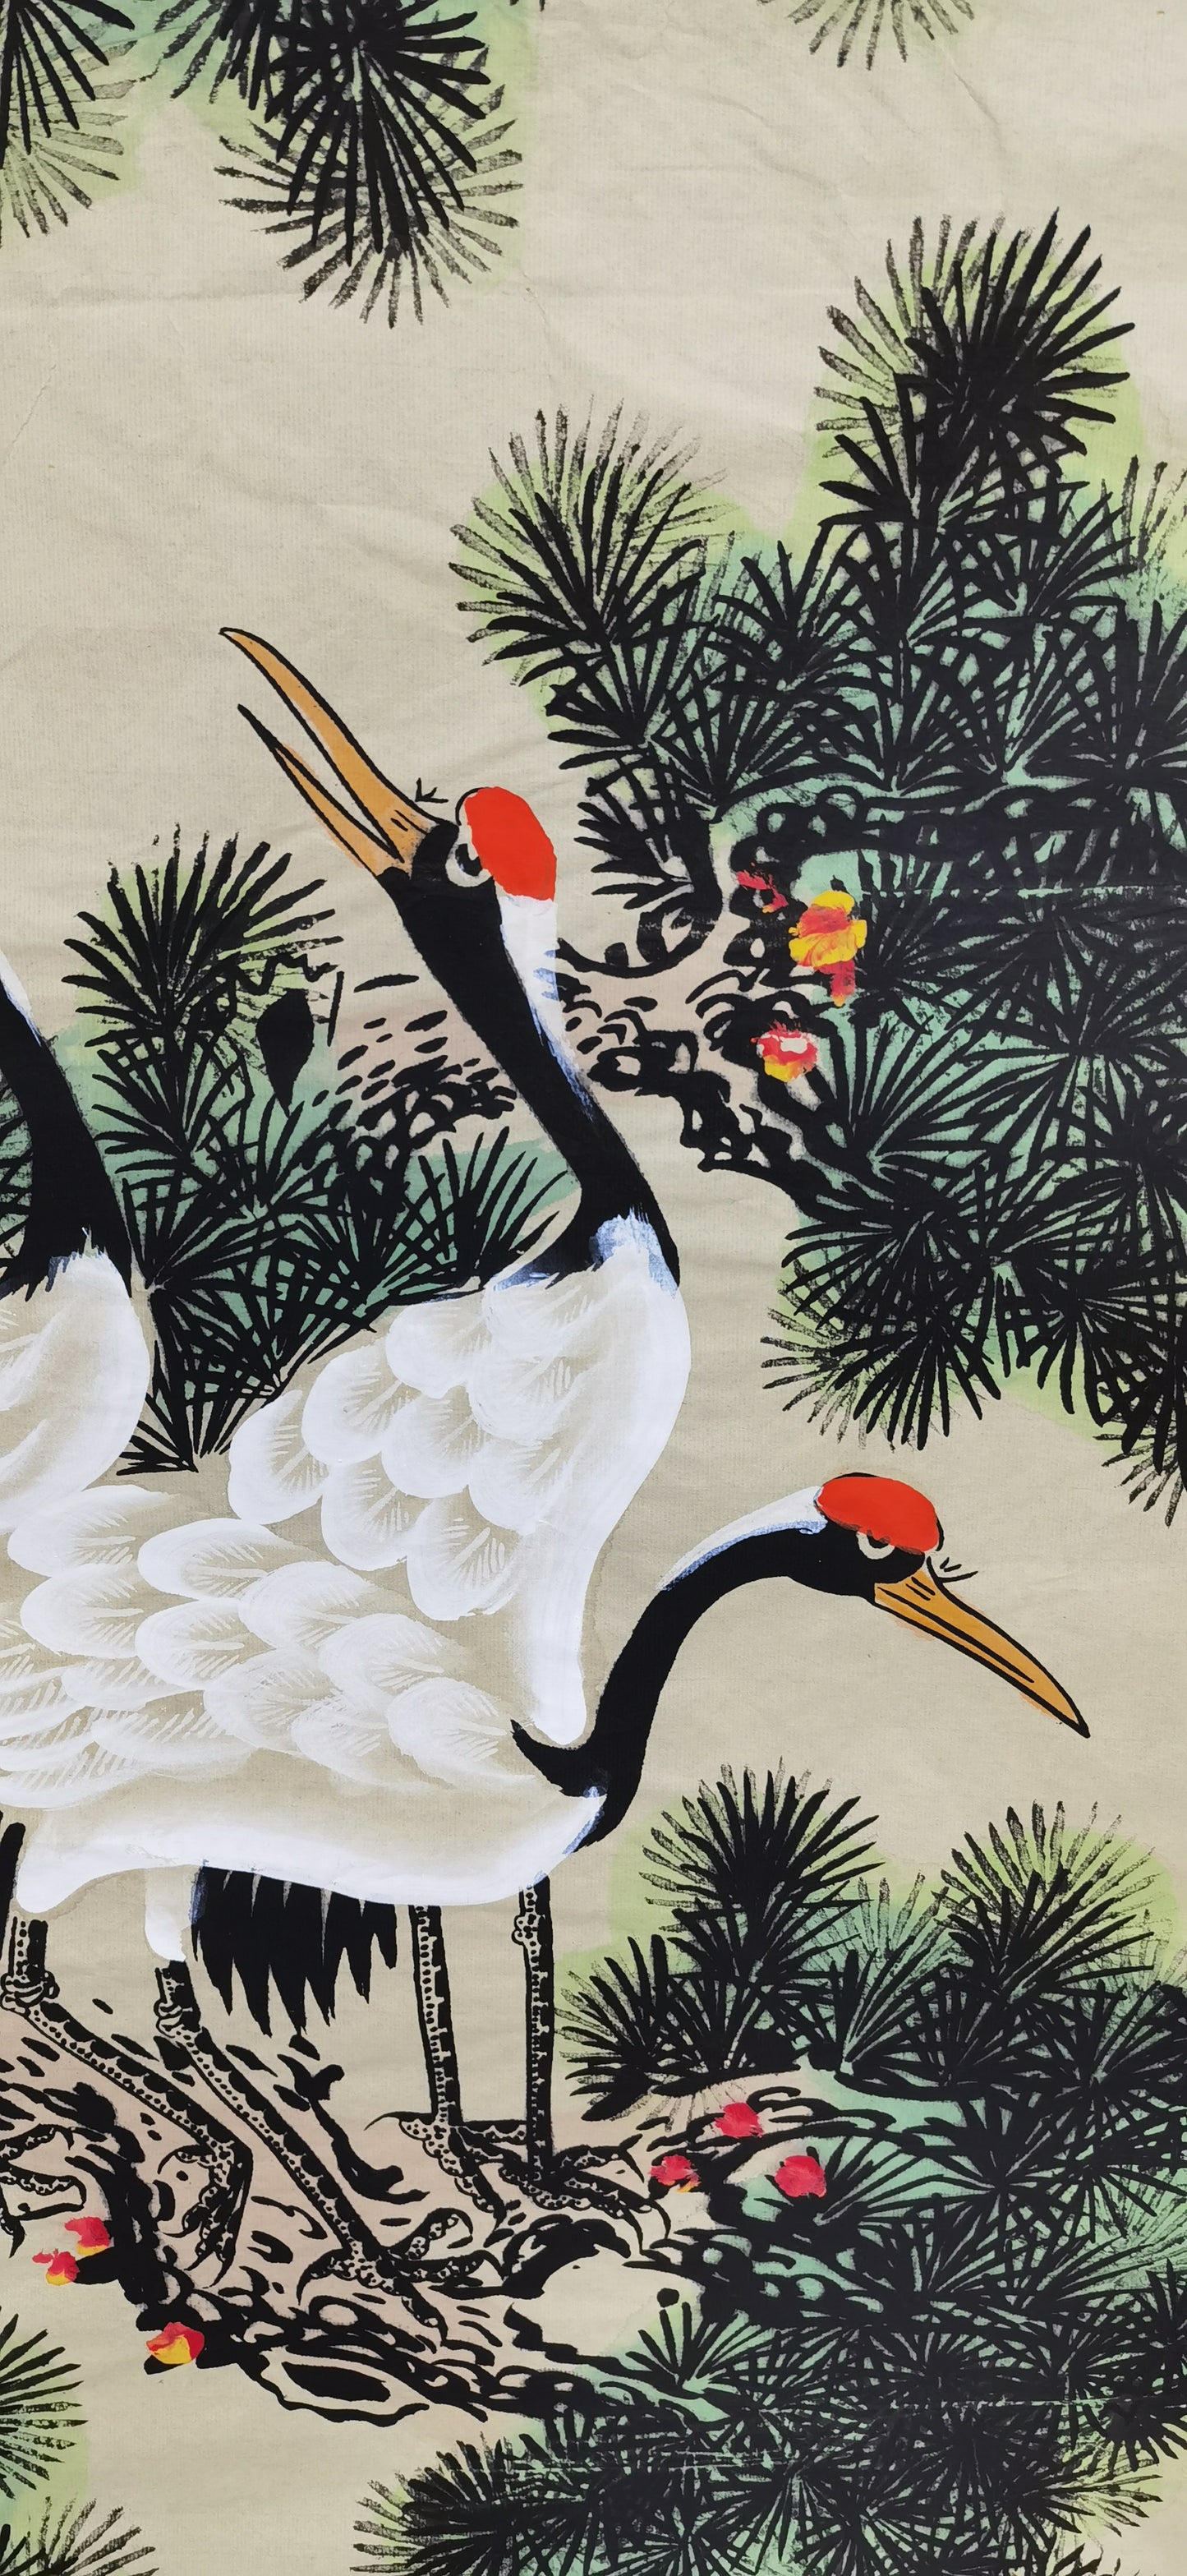 Chinese painting——Pine tree and red-crowned crane, Live Long and Prosper. best gift for parents, grandparents and senior citizens,